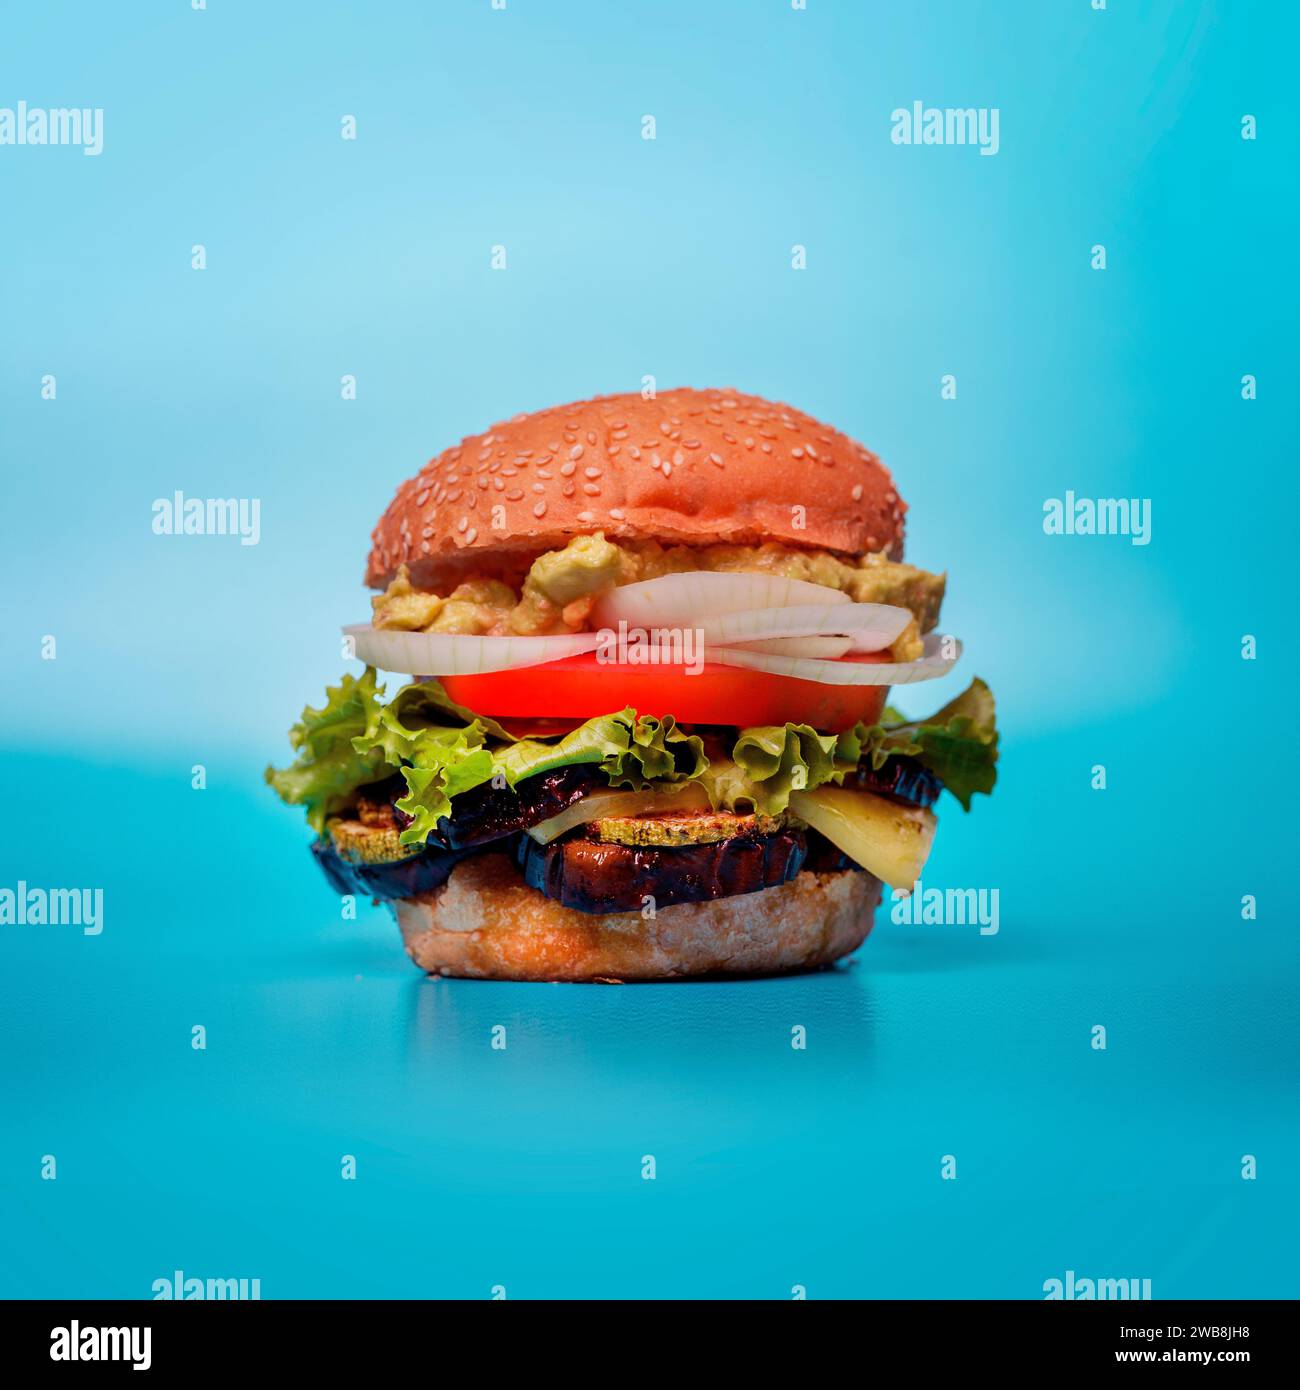 A freshly-made hamburger on a blue background, with lettuce, tomato, onion, and pickles. Stock Photo